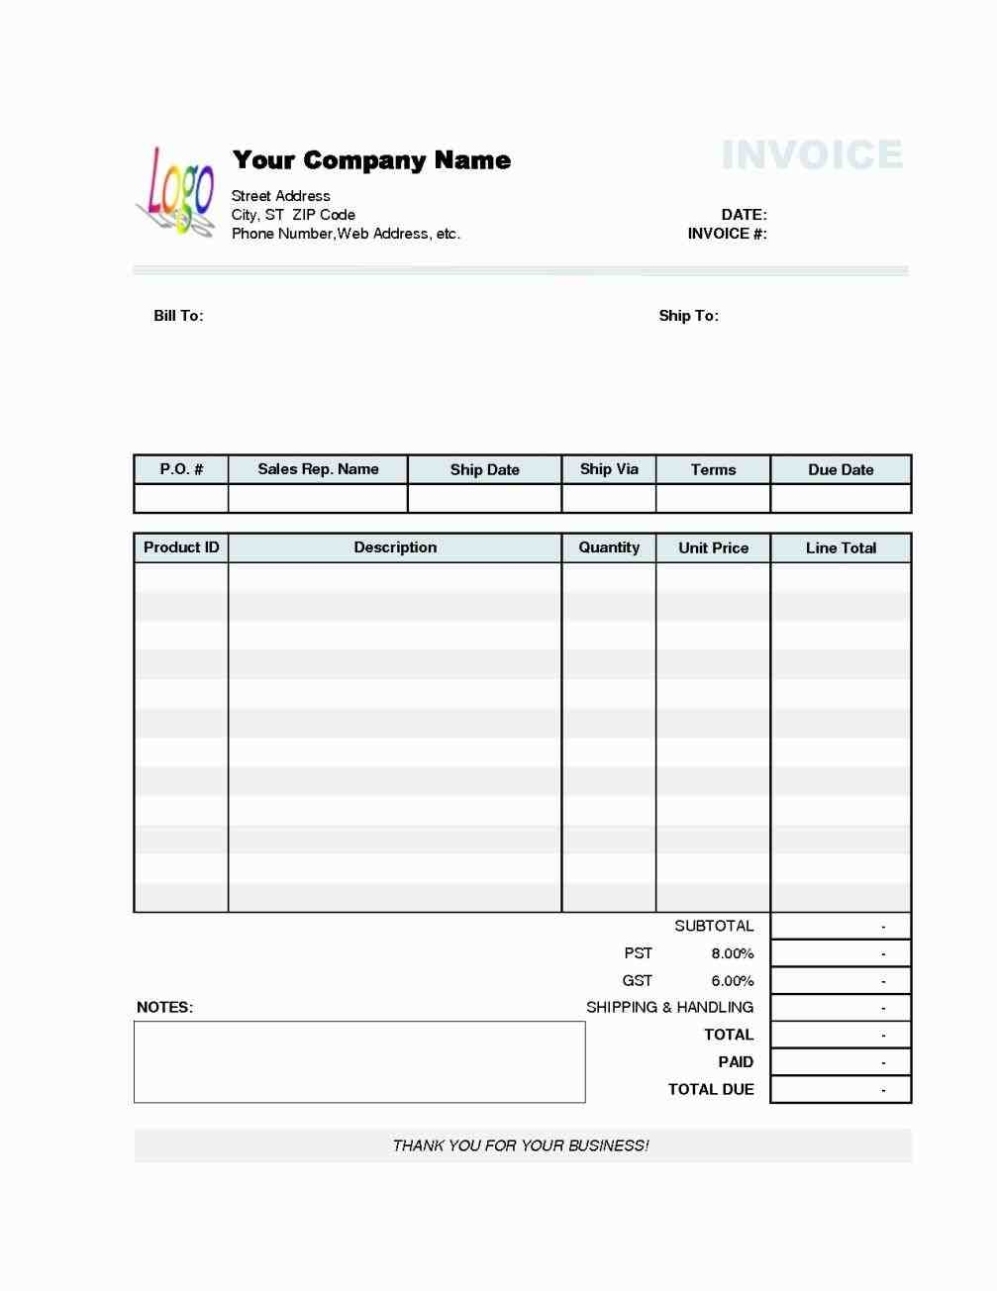 Handyman Invoice - Sample Templates - Sample Templates In Parts And Labor Invoice Template Free